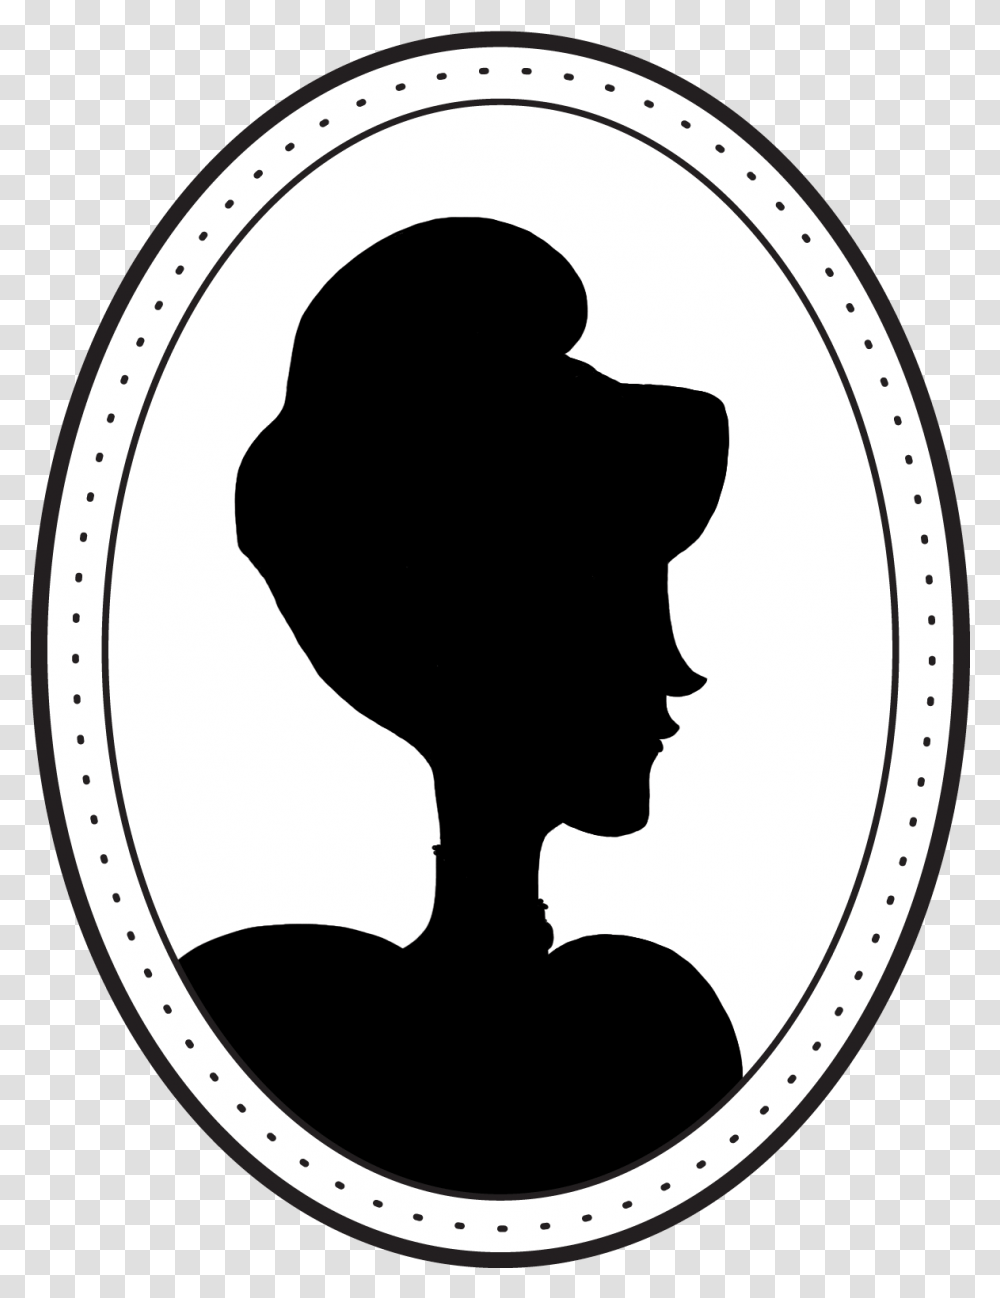 Clip Royalty Free Madge Of Truth Cara Rowlands Laura Victorian Silhouette Woman Head, Armor, Oval Transparent Png